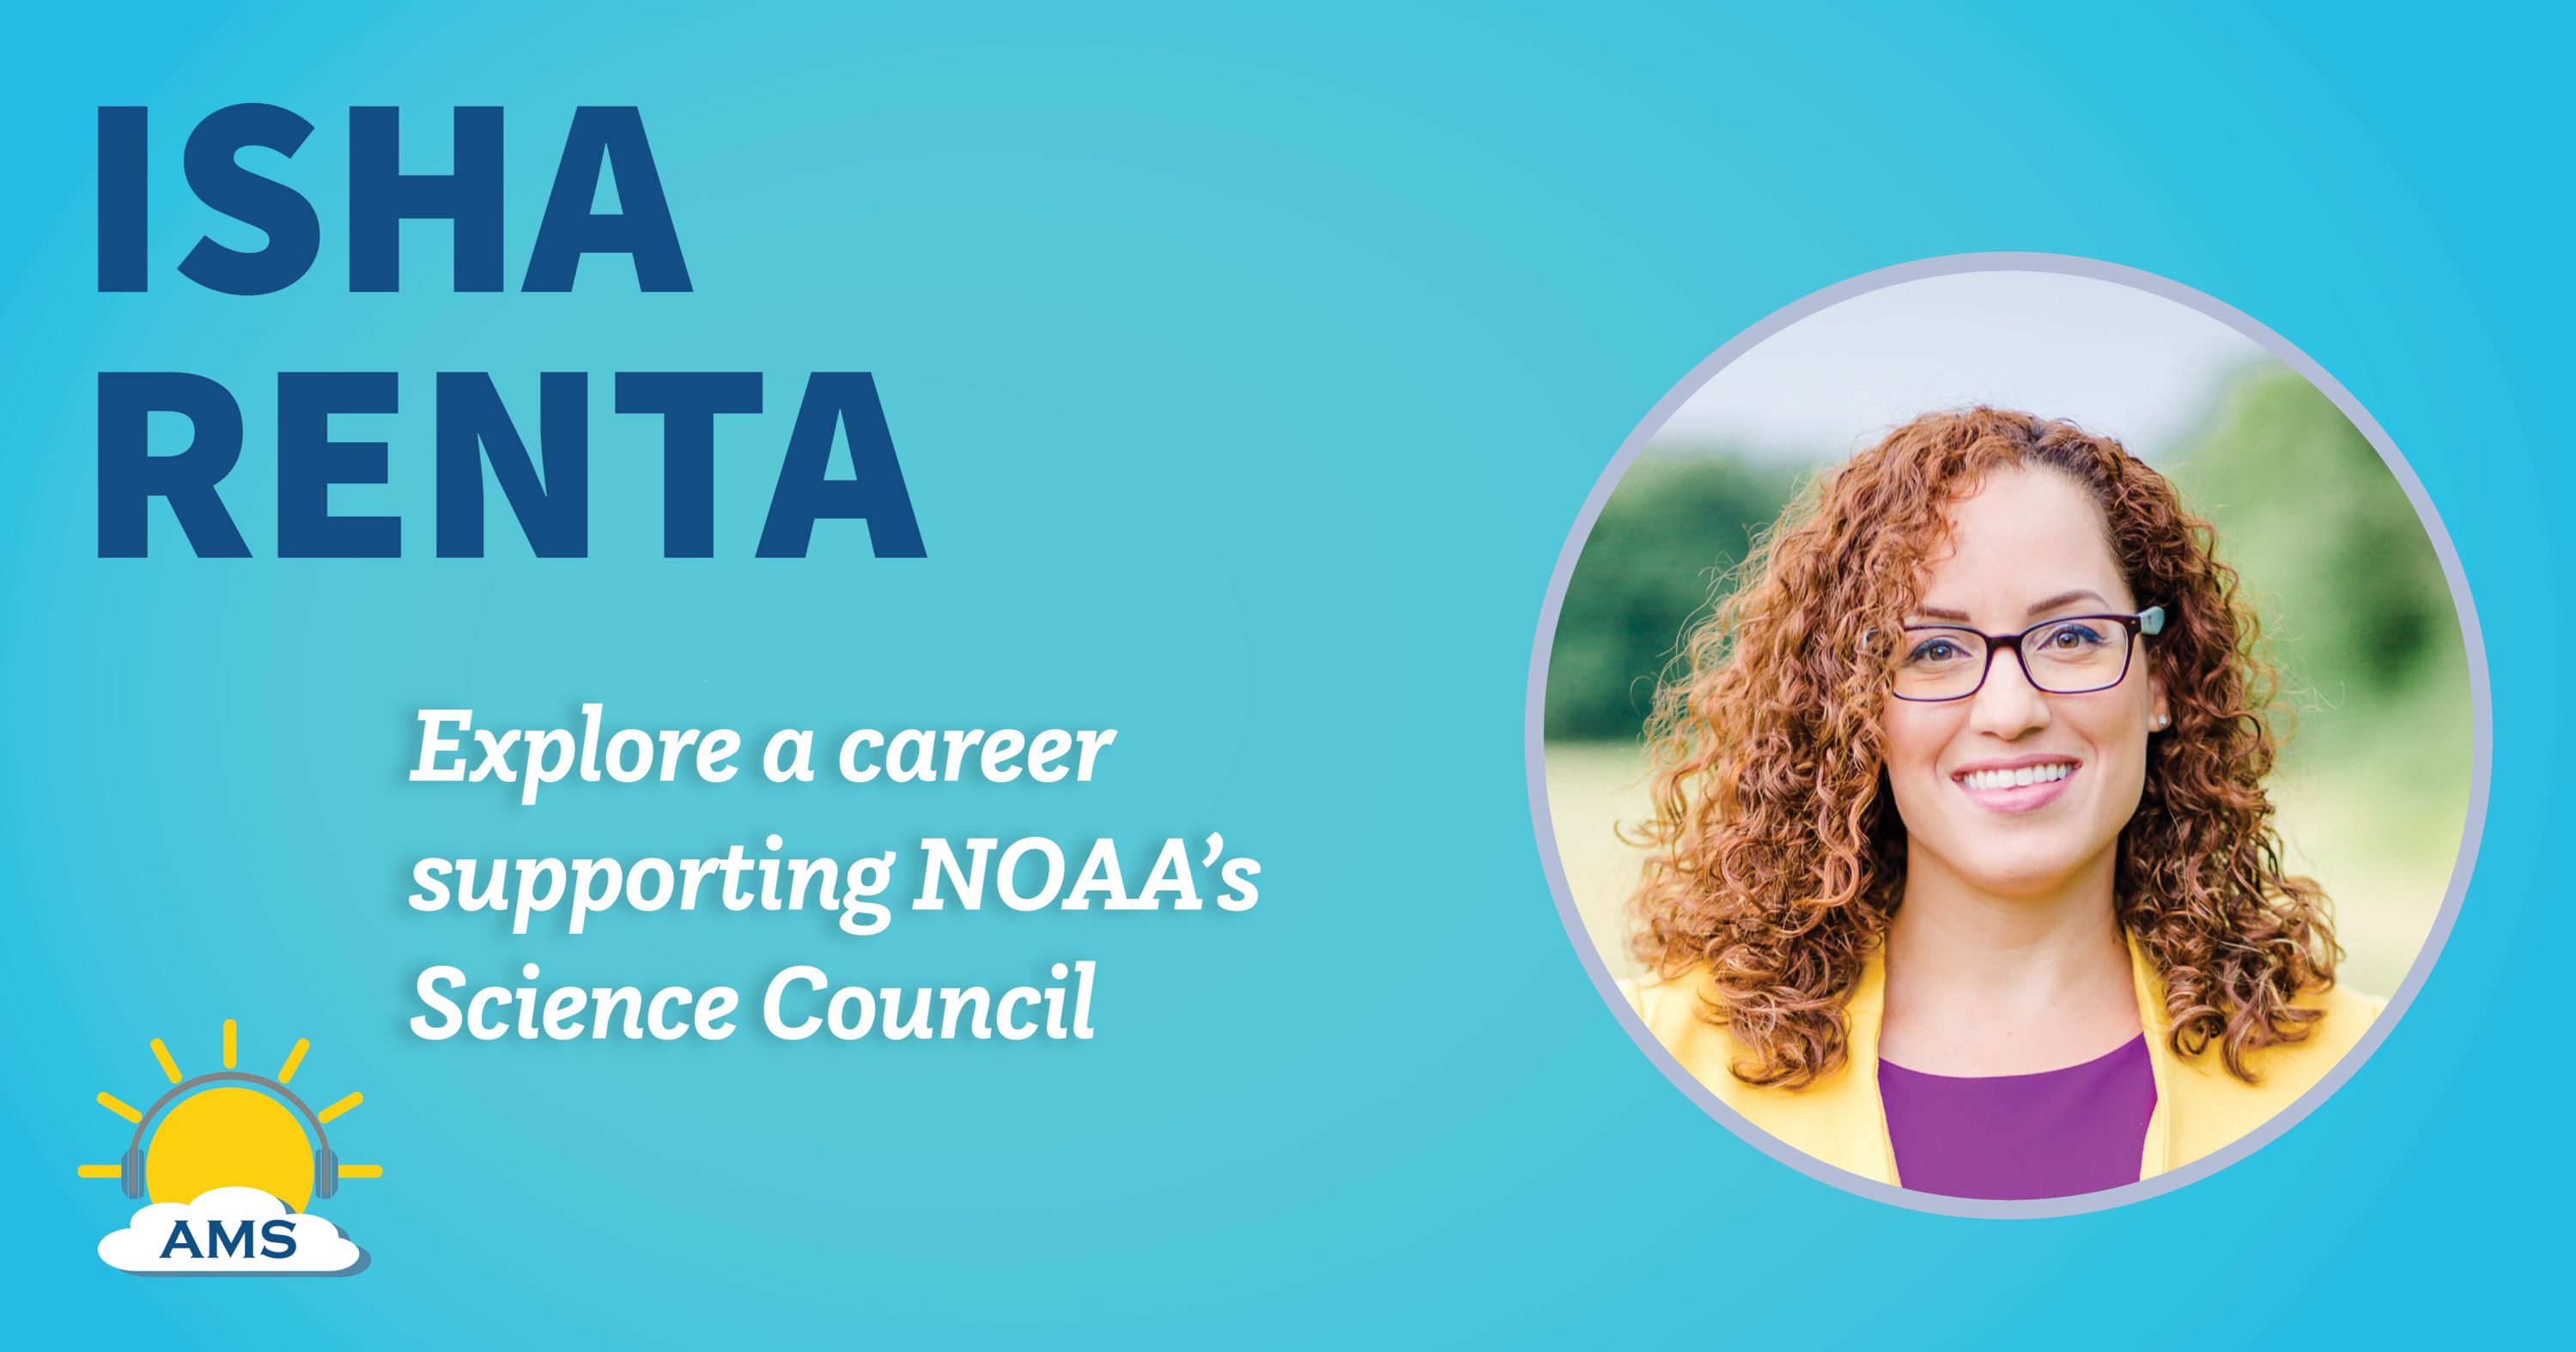 isha renta headshot graphic with teaser text that reads "explore a career supporting NOAA's Science Council"